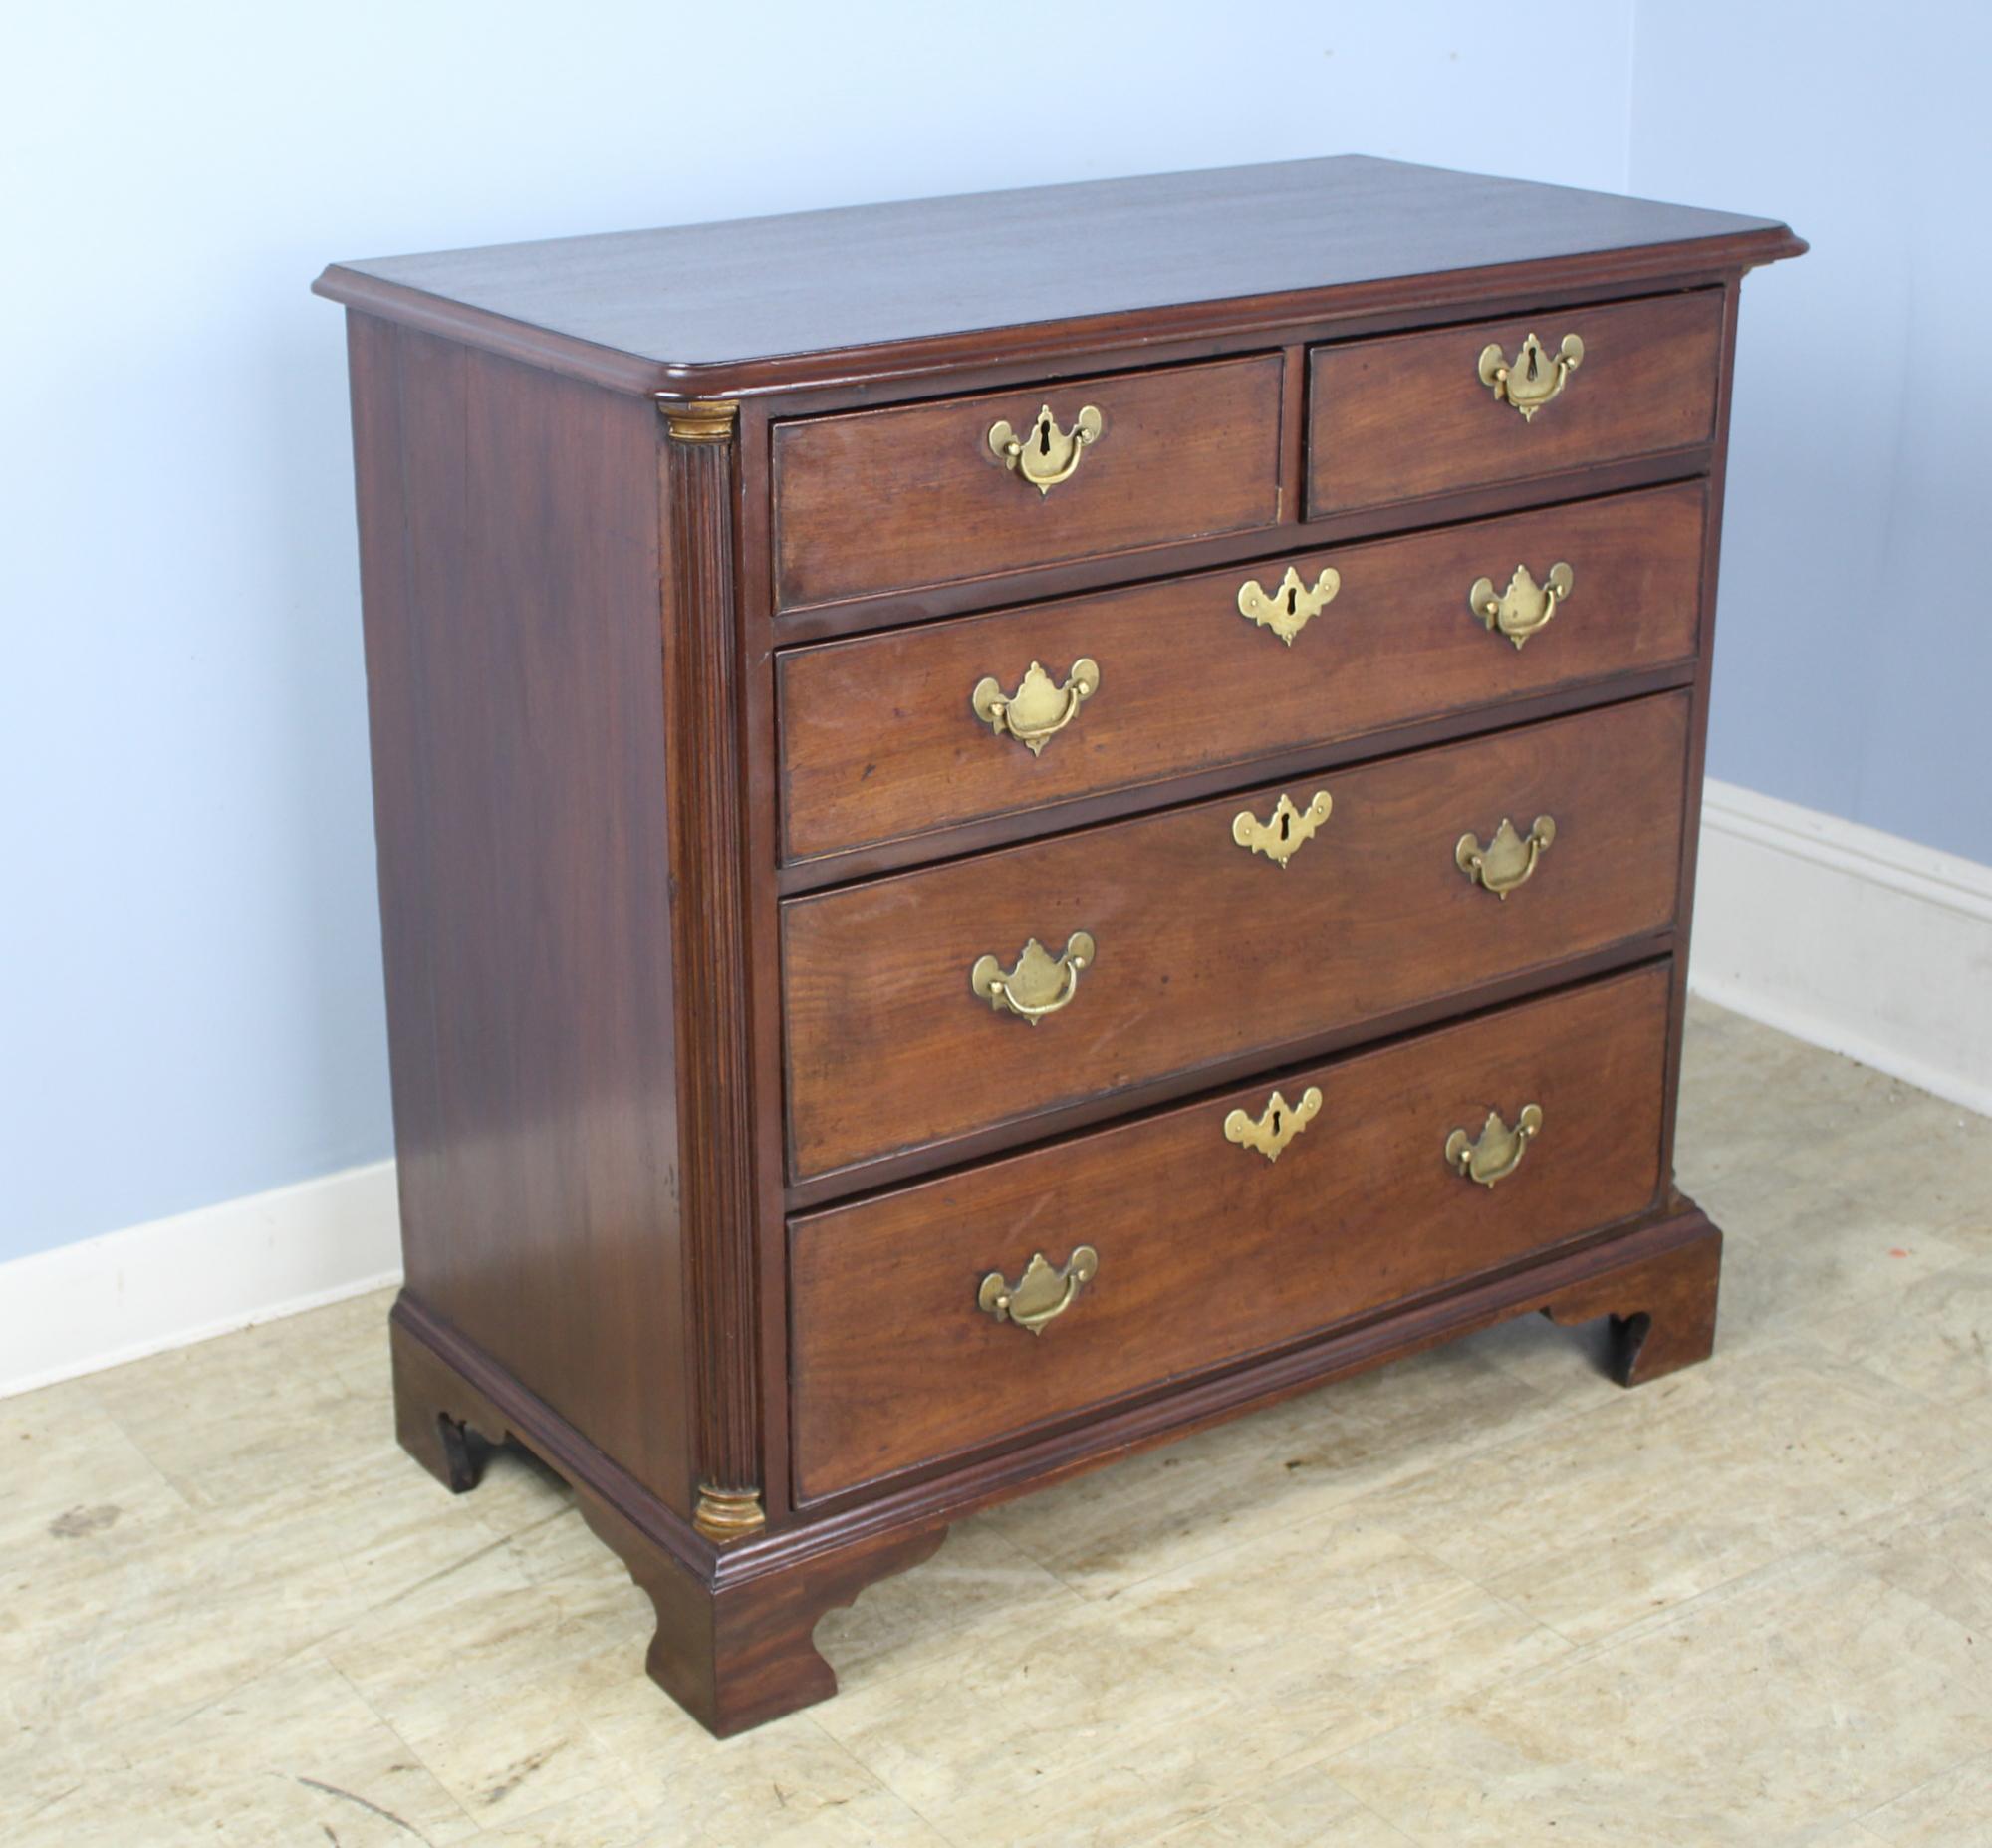 English Georgian Mahogany Chest of Drawers, Quarter Columns and Brass Capitals